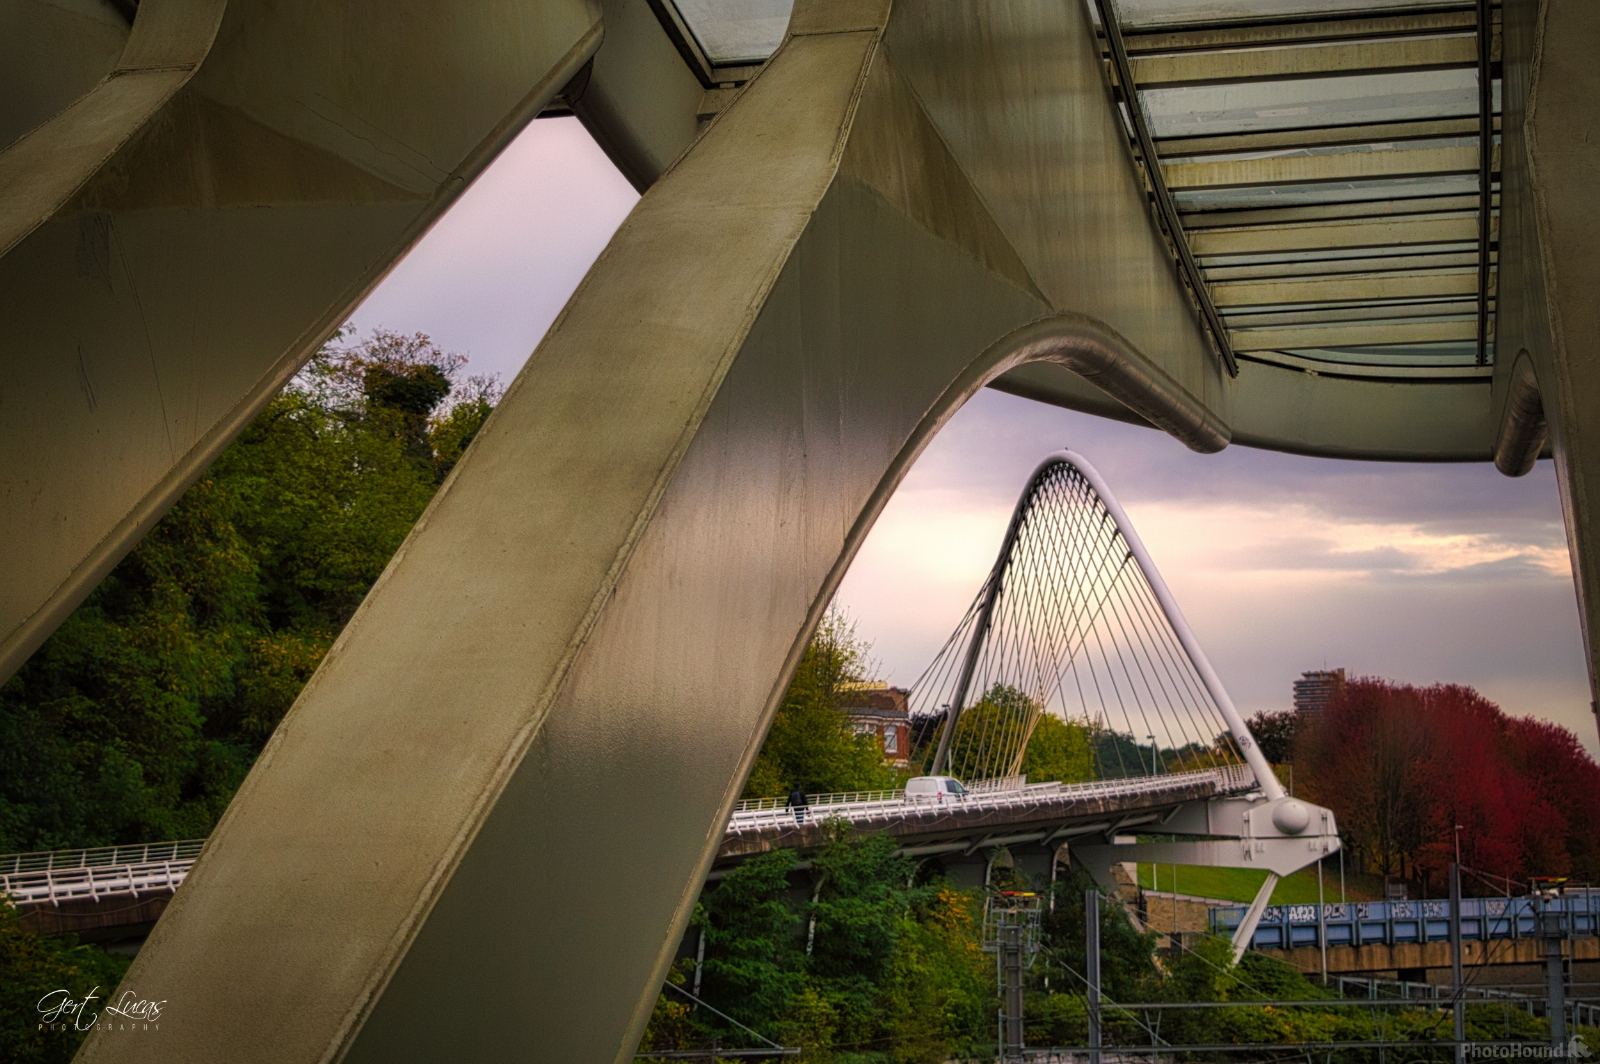 Image of Liege Guillemins Train Station by Gert Lucas